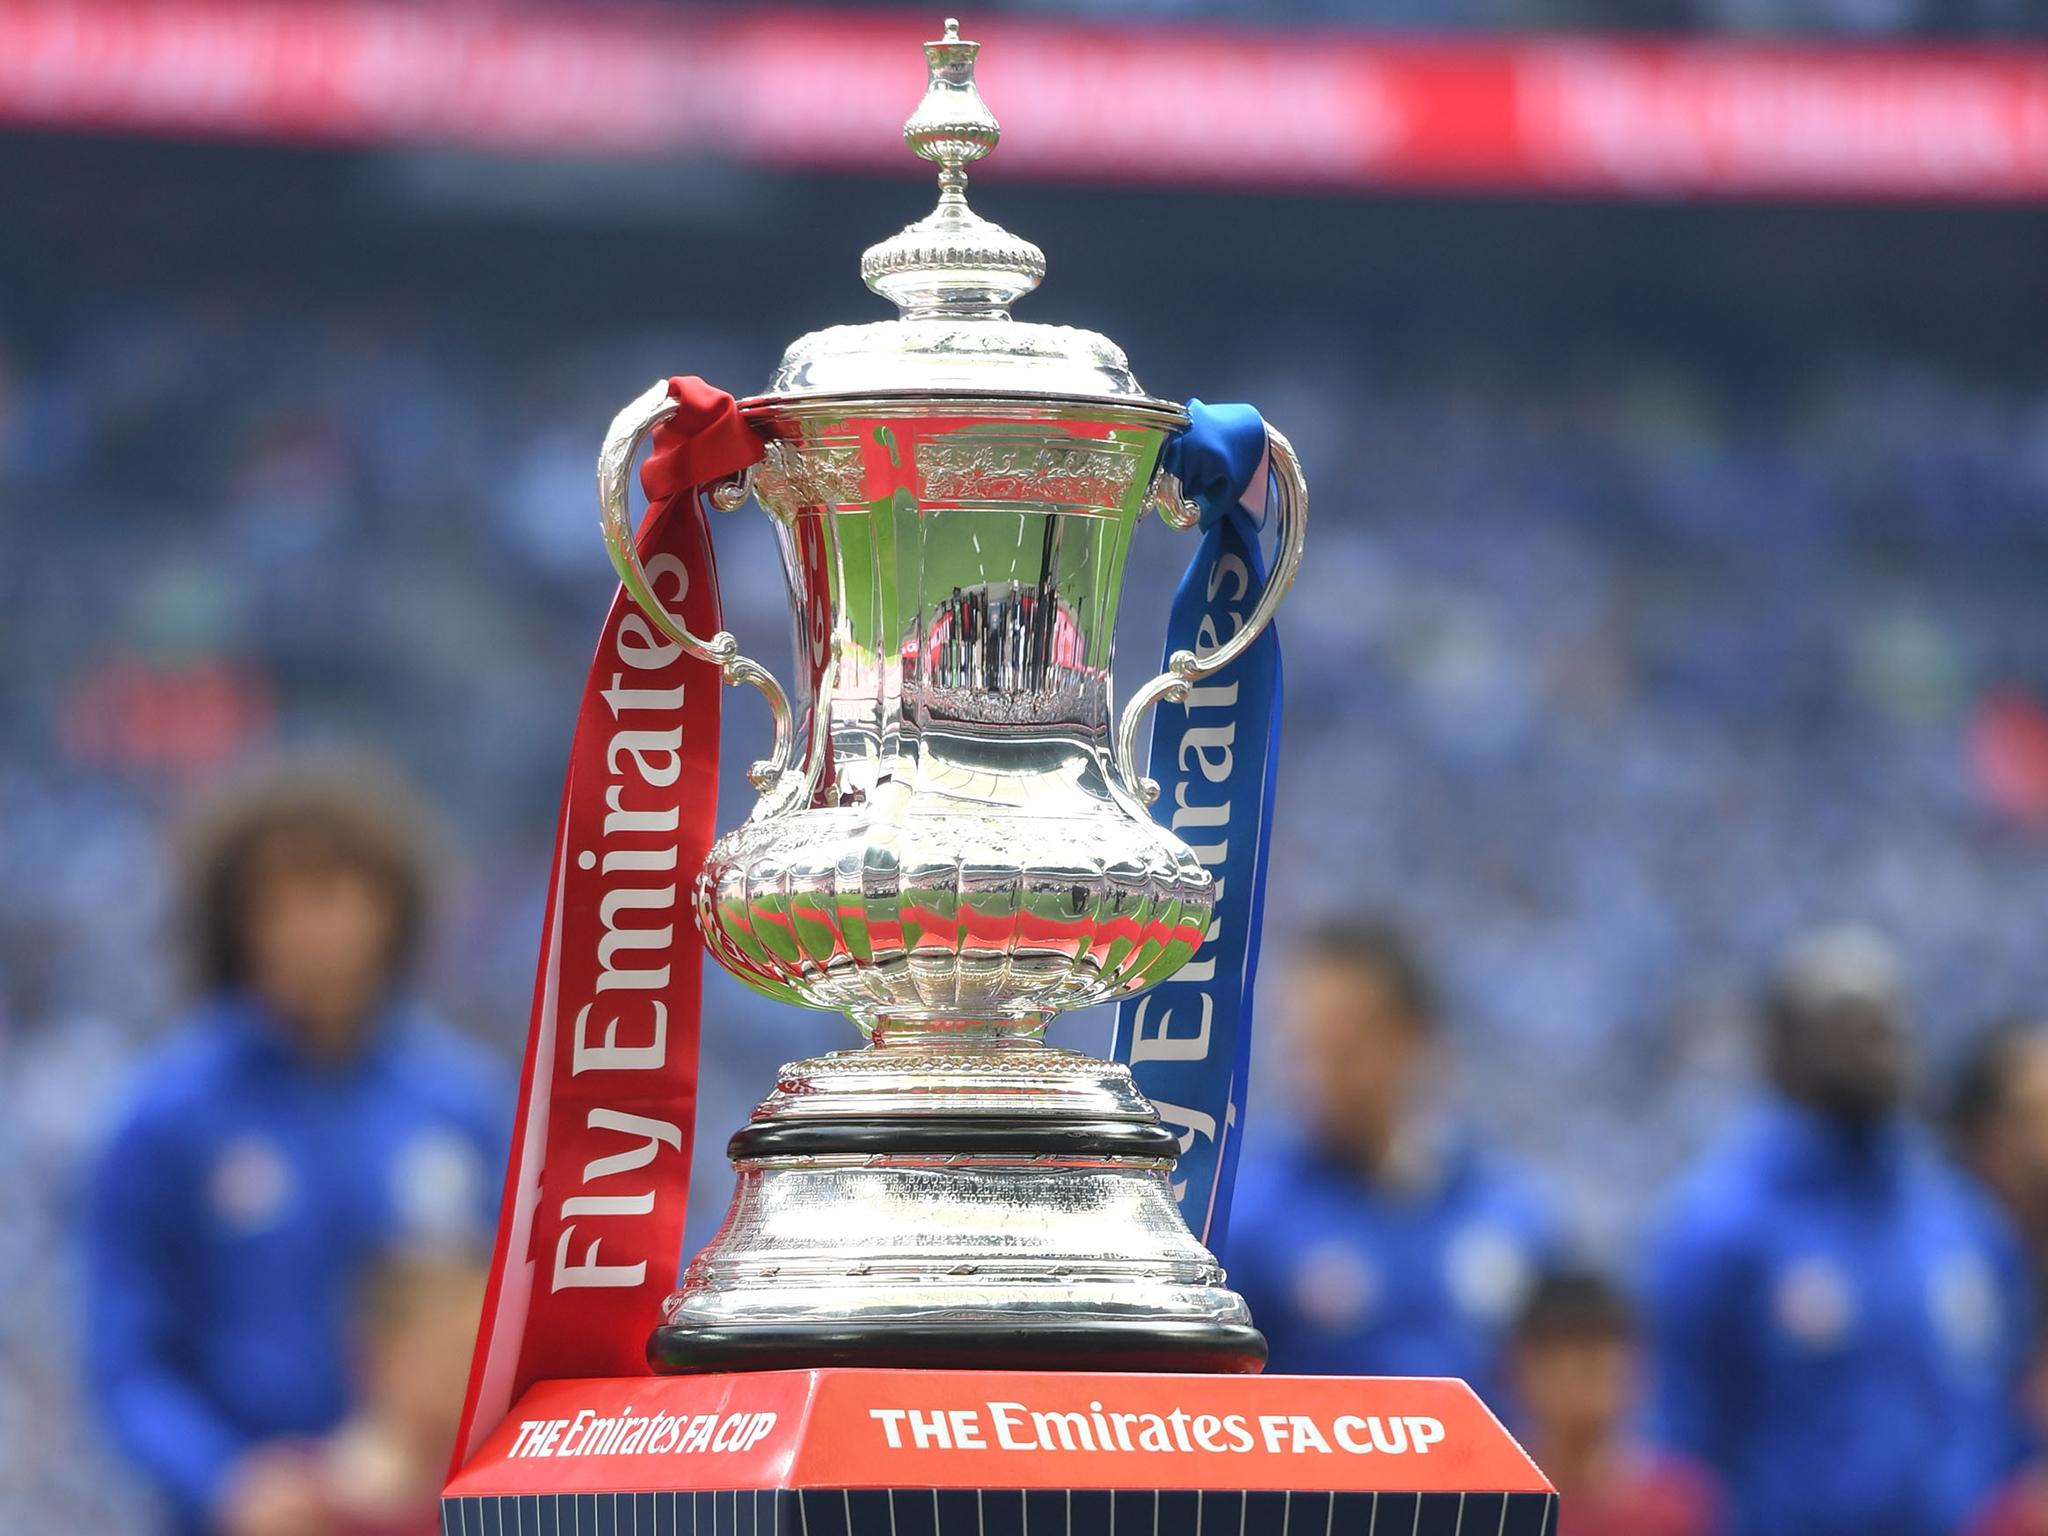 FA Cup final LIVE: What time does Manchester United vs Chelsea start, which TV channel is it on, latest updates